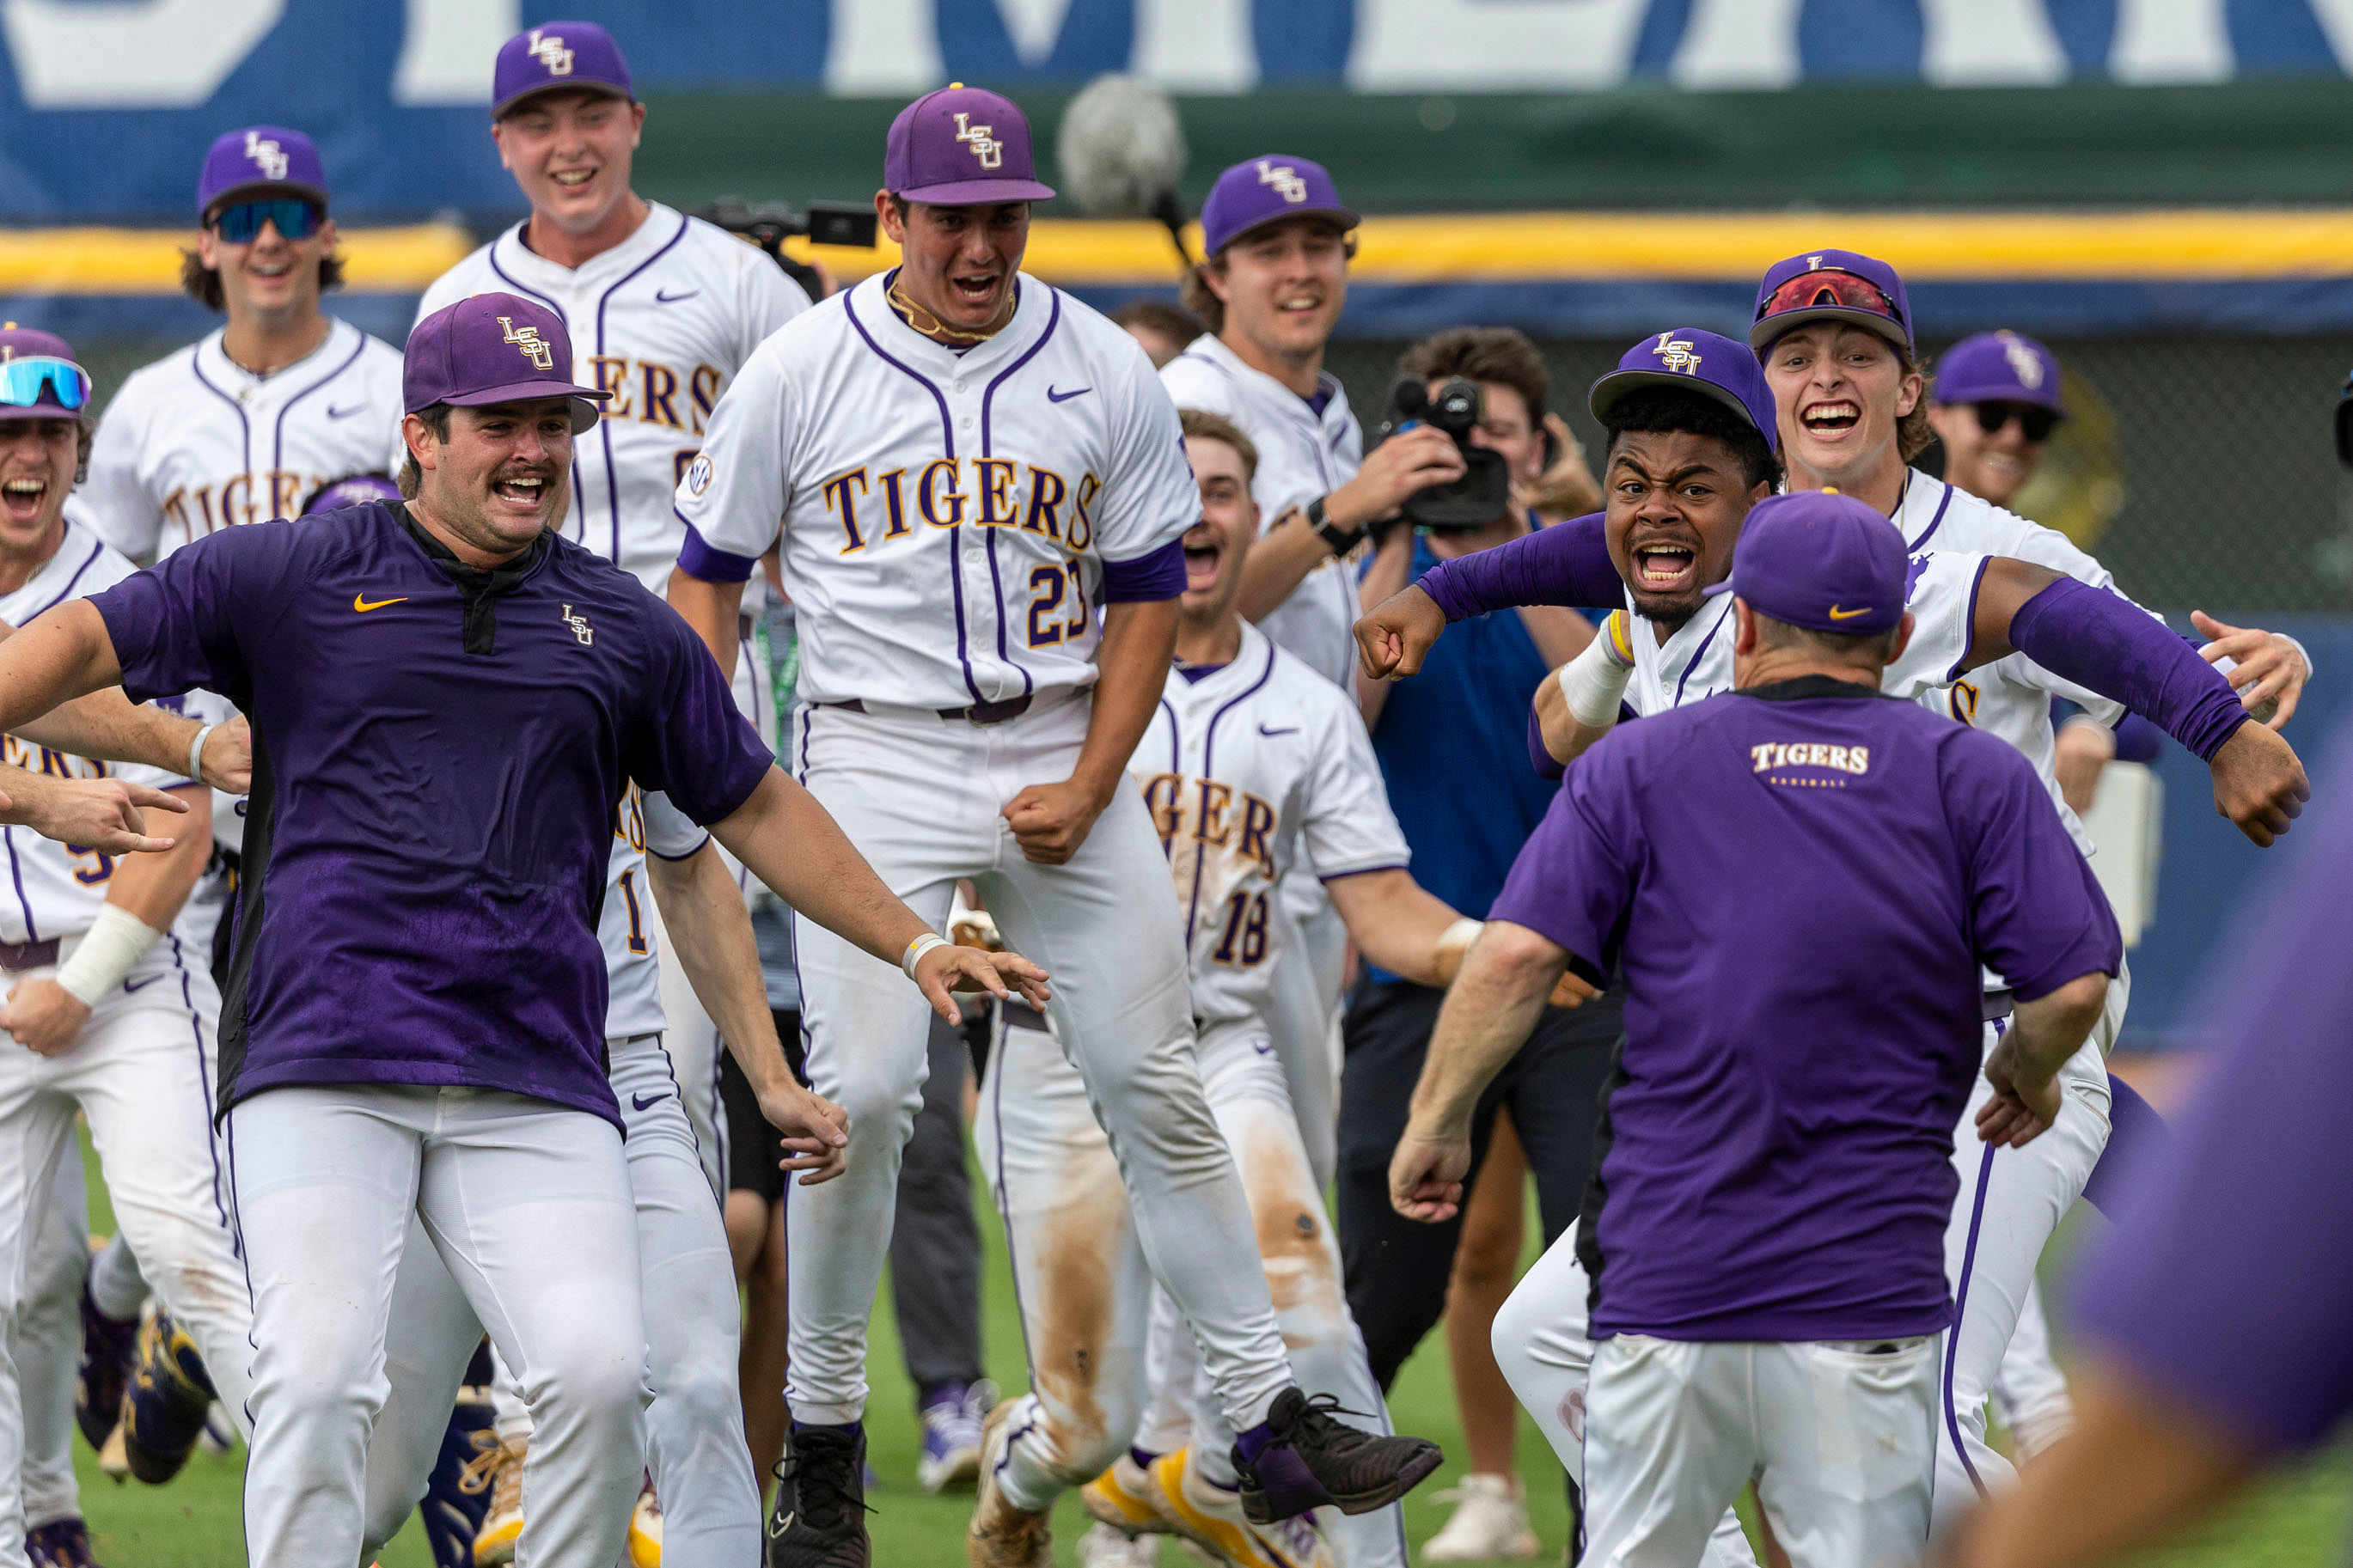 LSU coach Jay Johnson immediately returned to the field after the Tigers won over South Carolina in the SEC Tournament semifinals. The victory allows LSU to face top-seed Tennessee Volunteers in the final on Sunday.